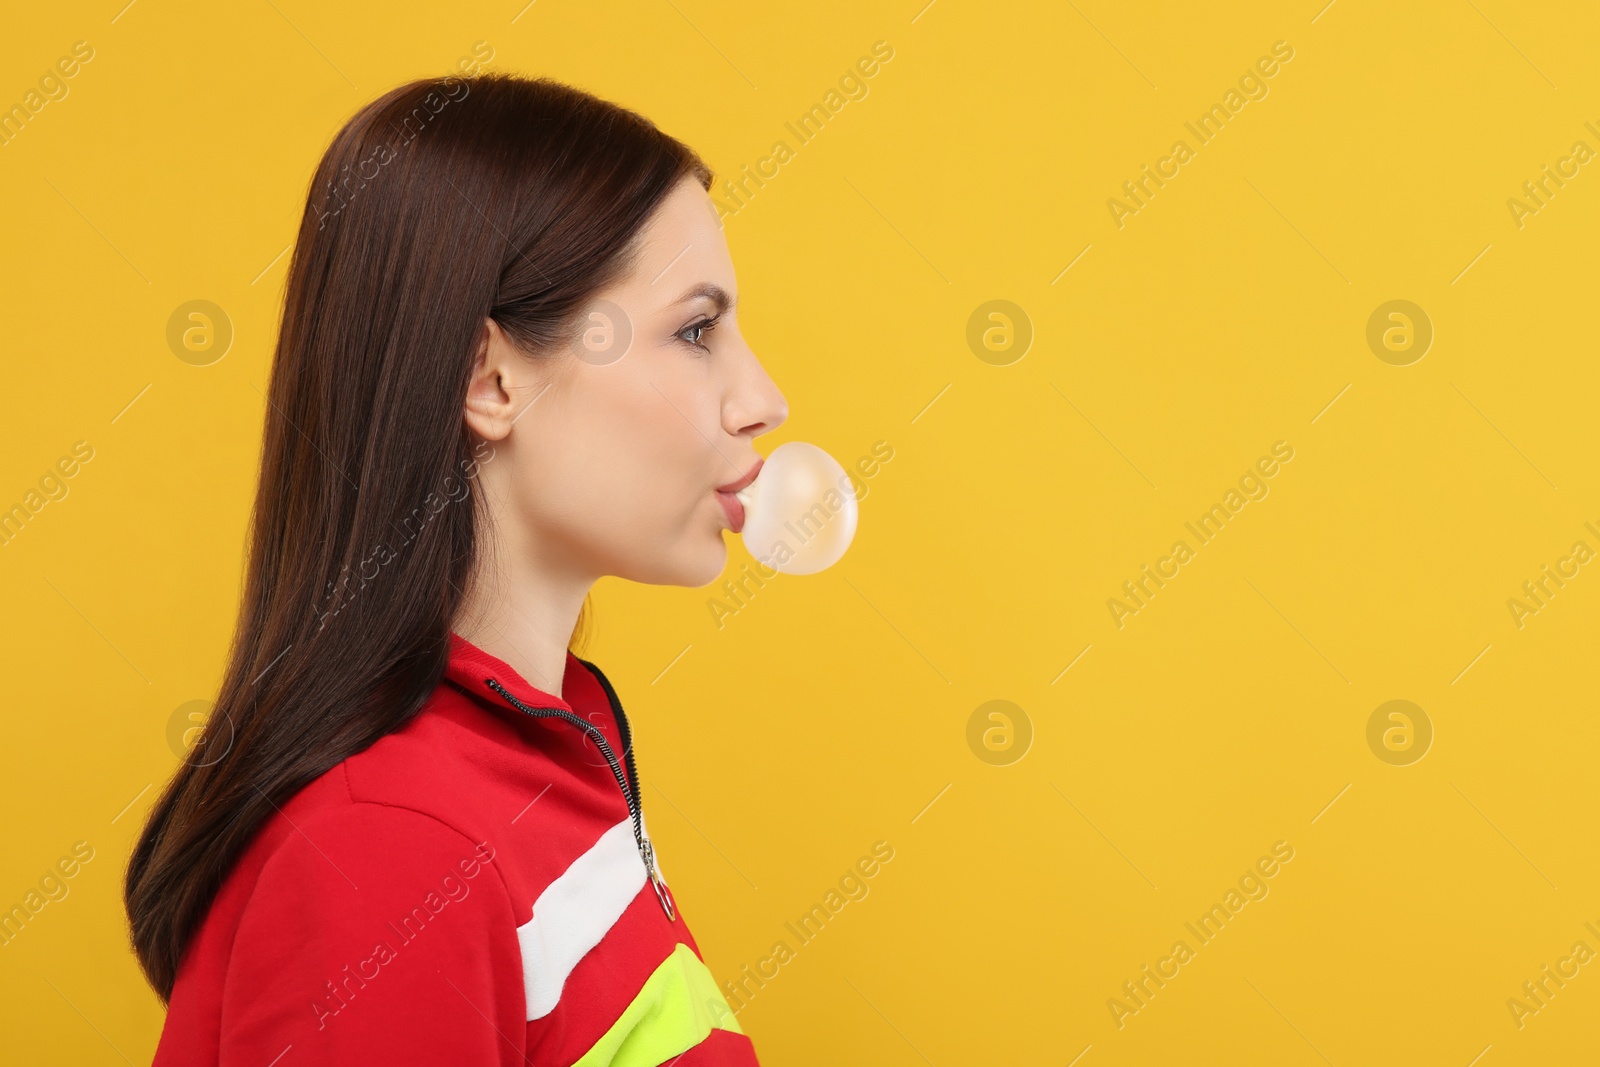 Photo of Beautiful woman blowing bubble gum on orange background, space for text